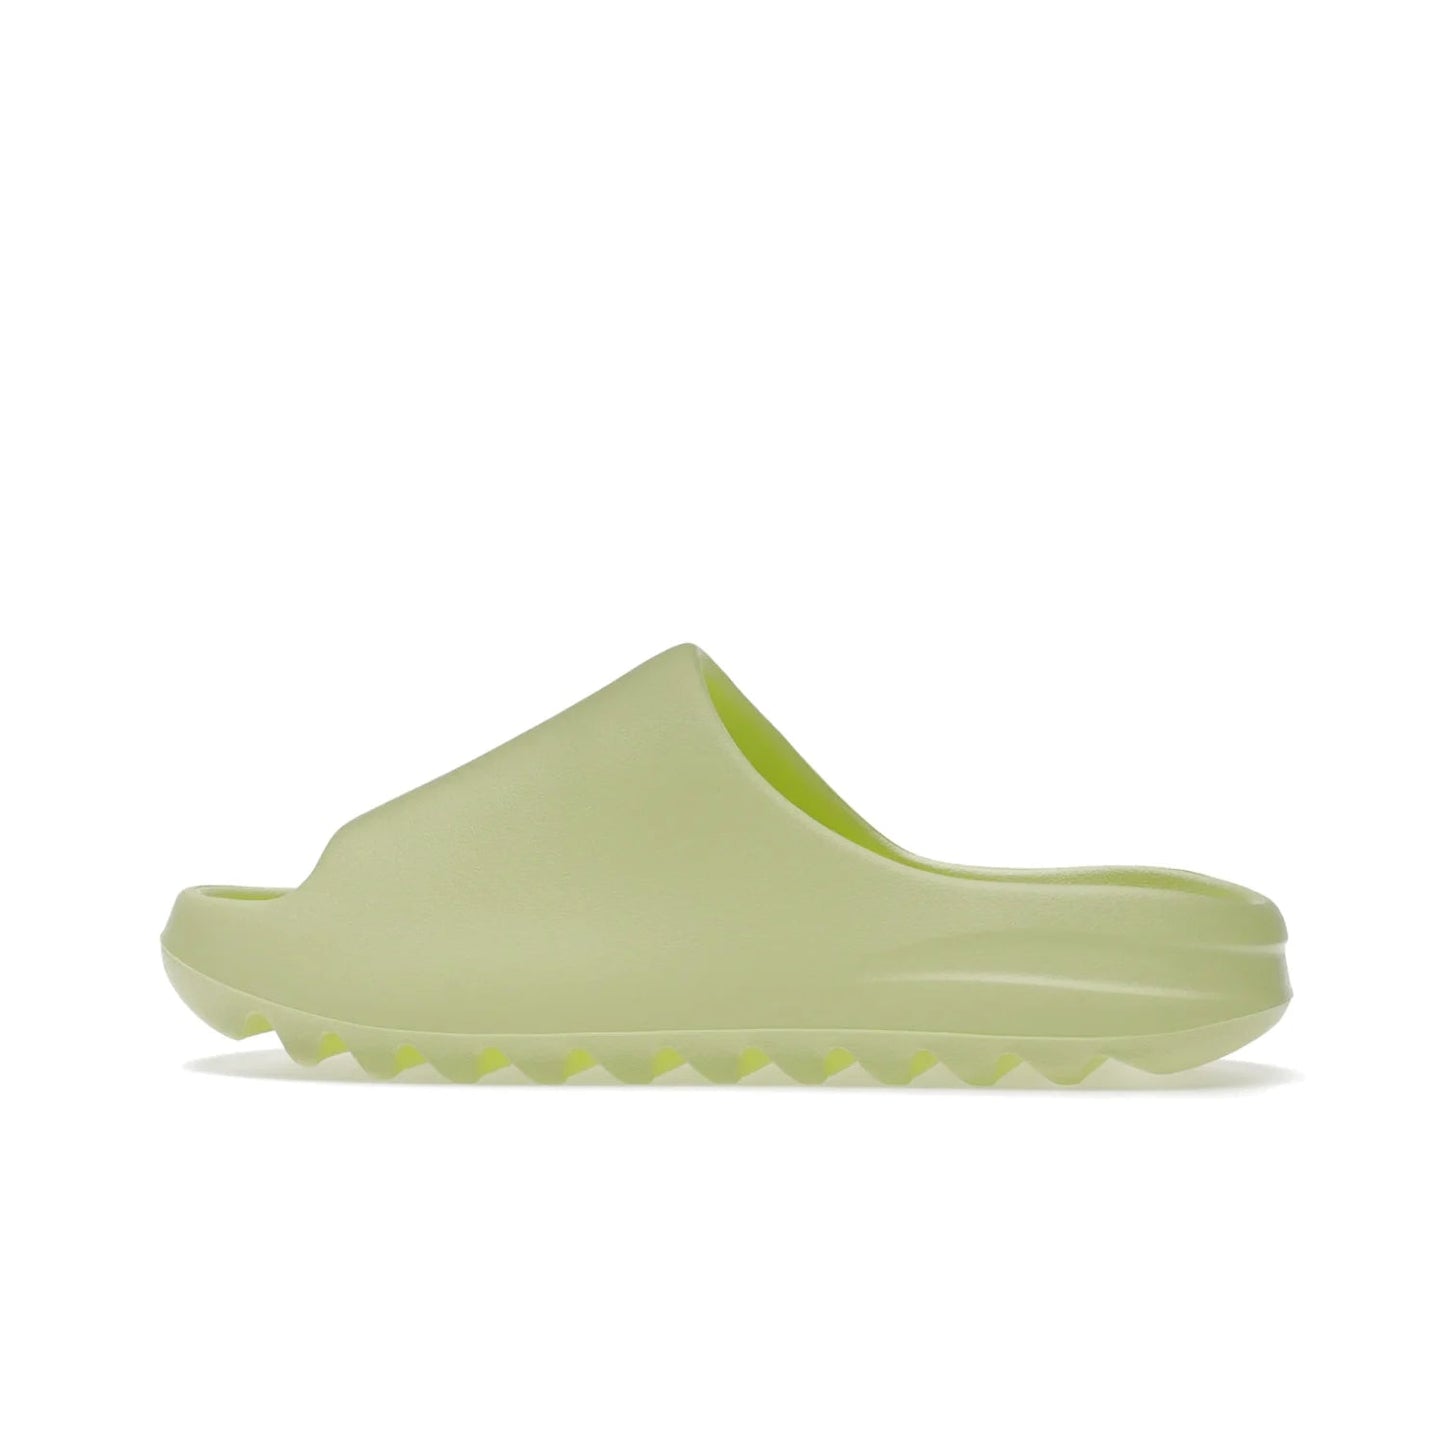 adidas Yeezy Slide Glow Green (2022) (Restock) - Image 20 - Only at www.BallersClubKickz.com - #
Introducing the Adidas Yeezy Slide Glow Green (2022) Restock. Offering ultimate comfort & responsive style with its grooved outsole. Grab your pair on May 2022 for an unforgettable addition to your sneaker collection. US and UK sizes the same.